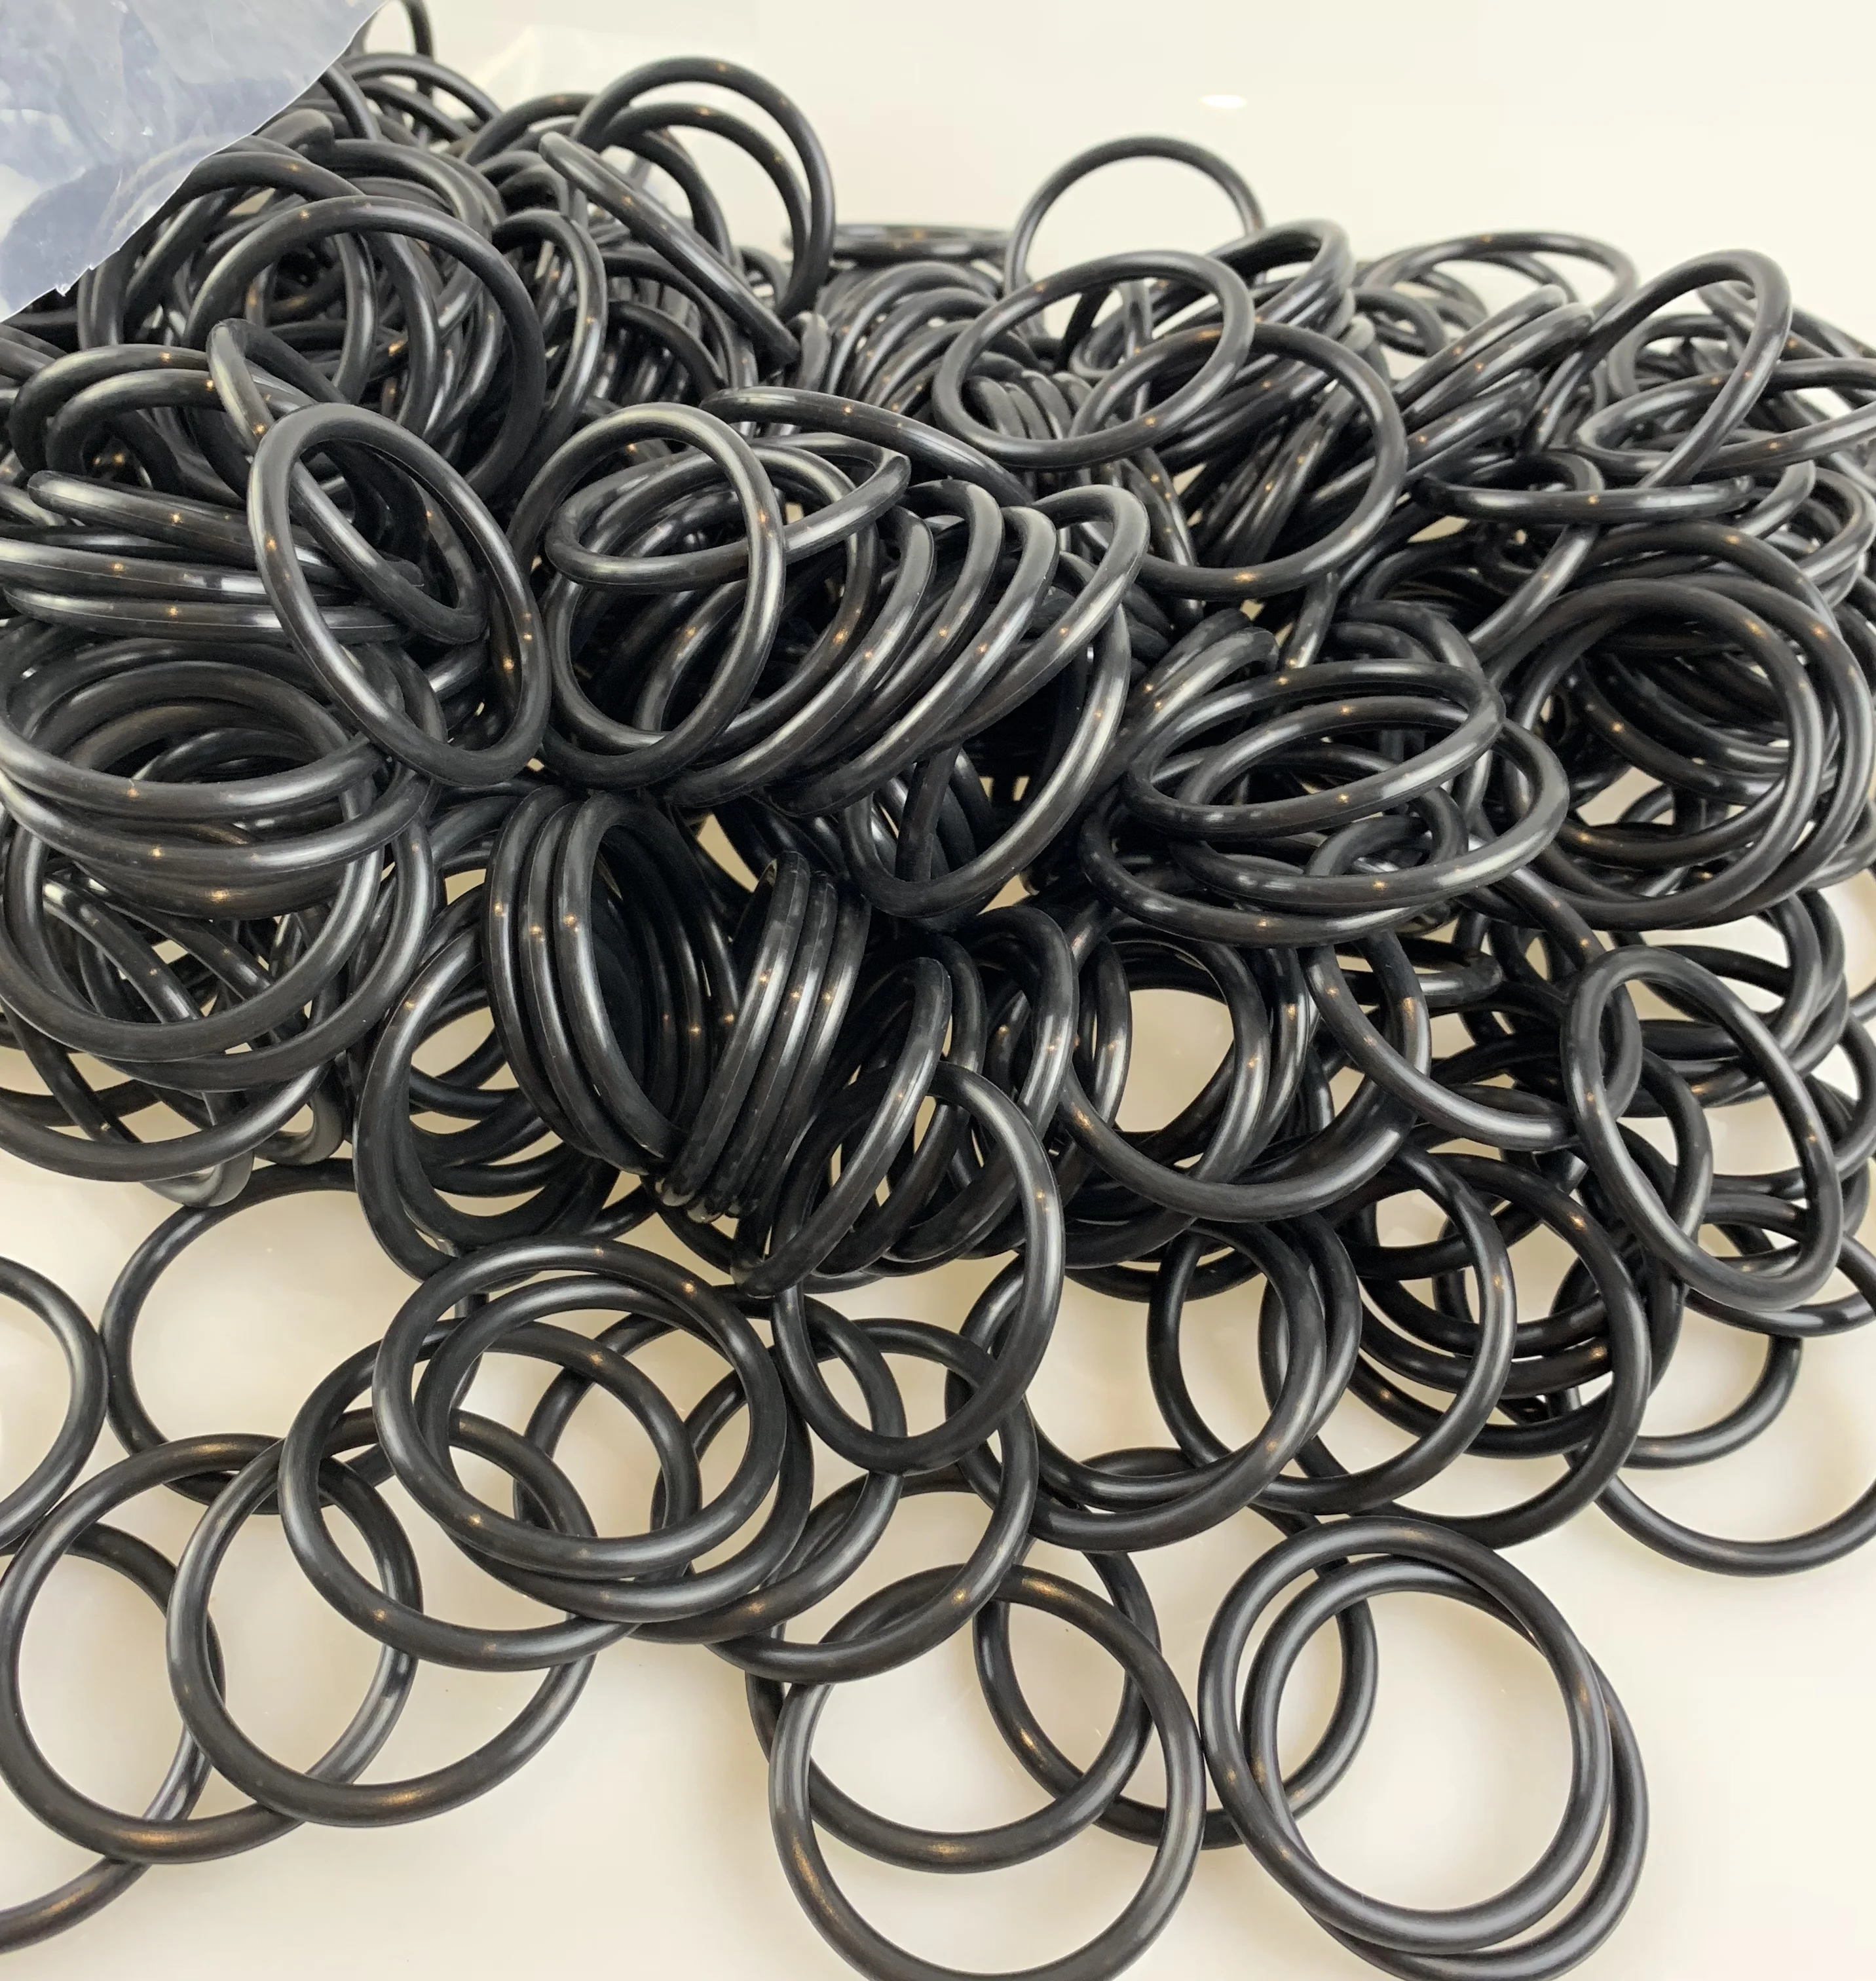 7.5 8 8.4 9.2mm Silicone Rubber O Rings Nr Cr Nbr Epdm Rubber Orings ...